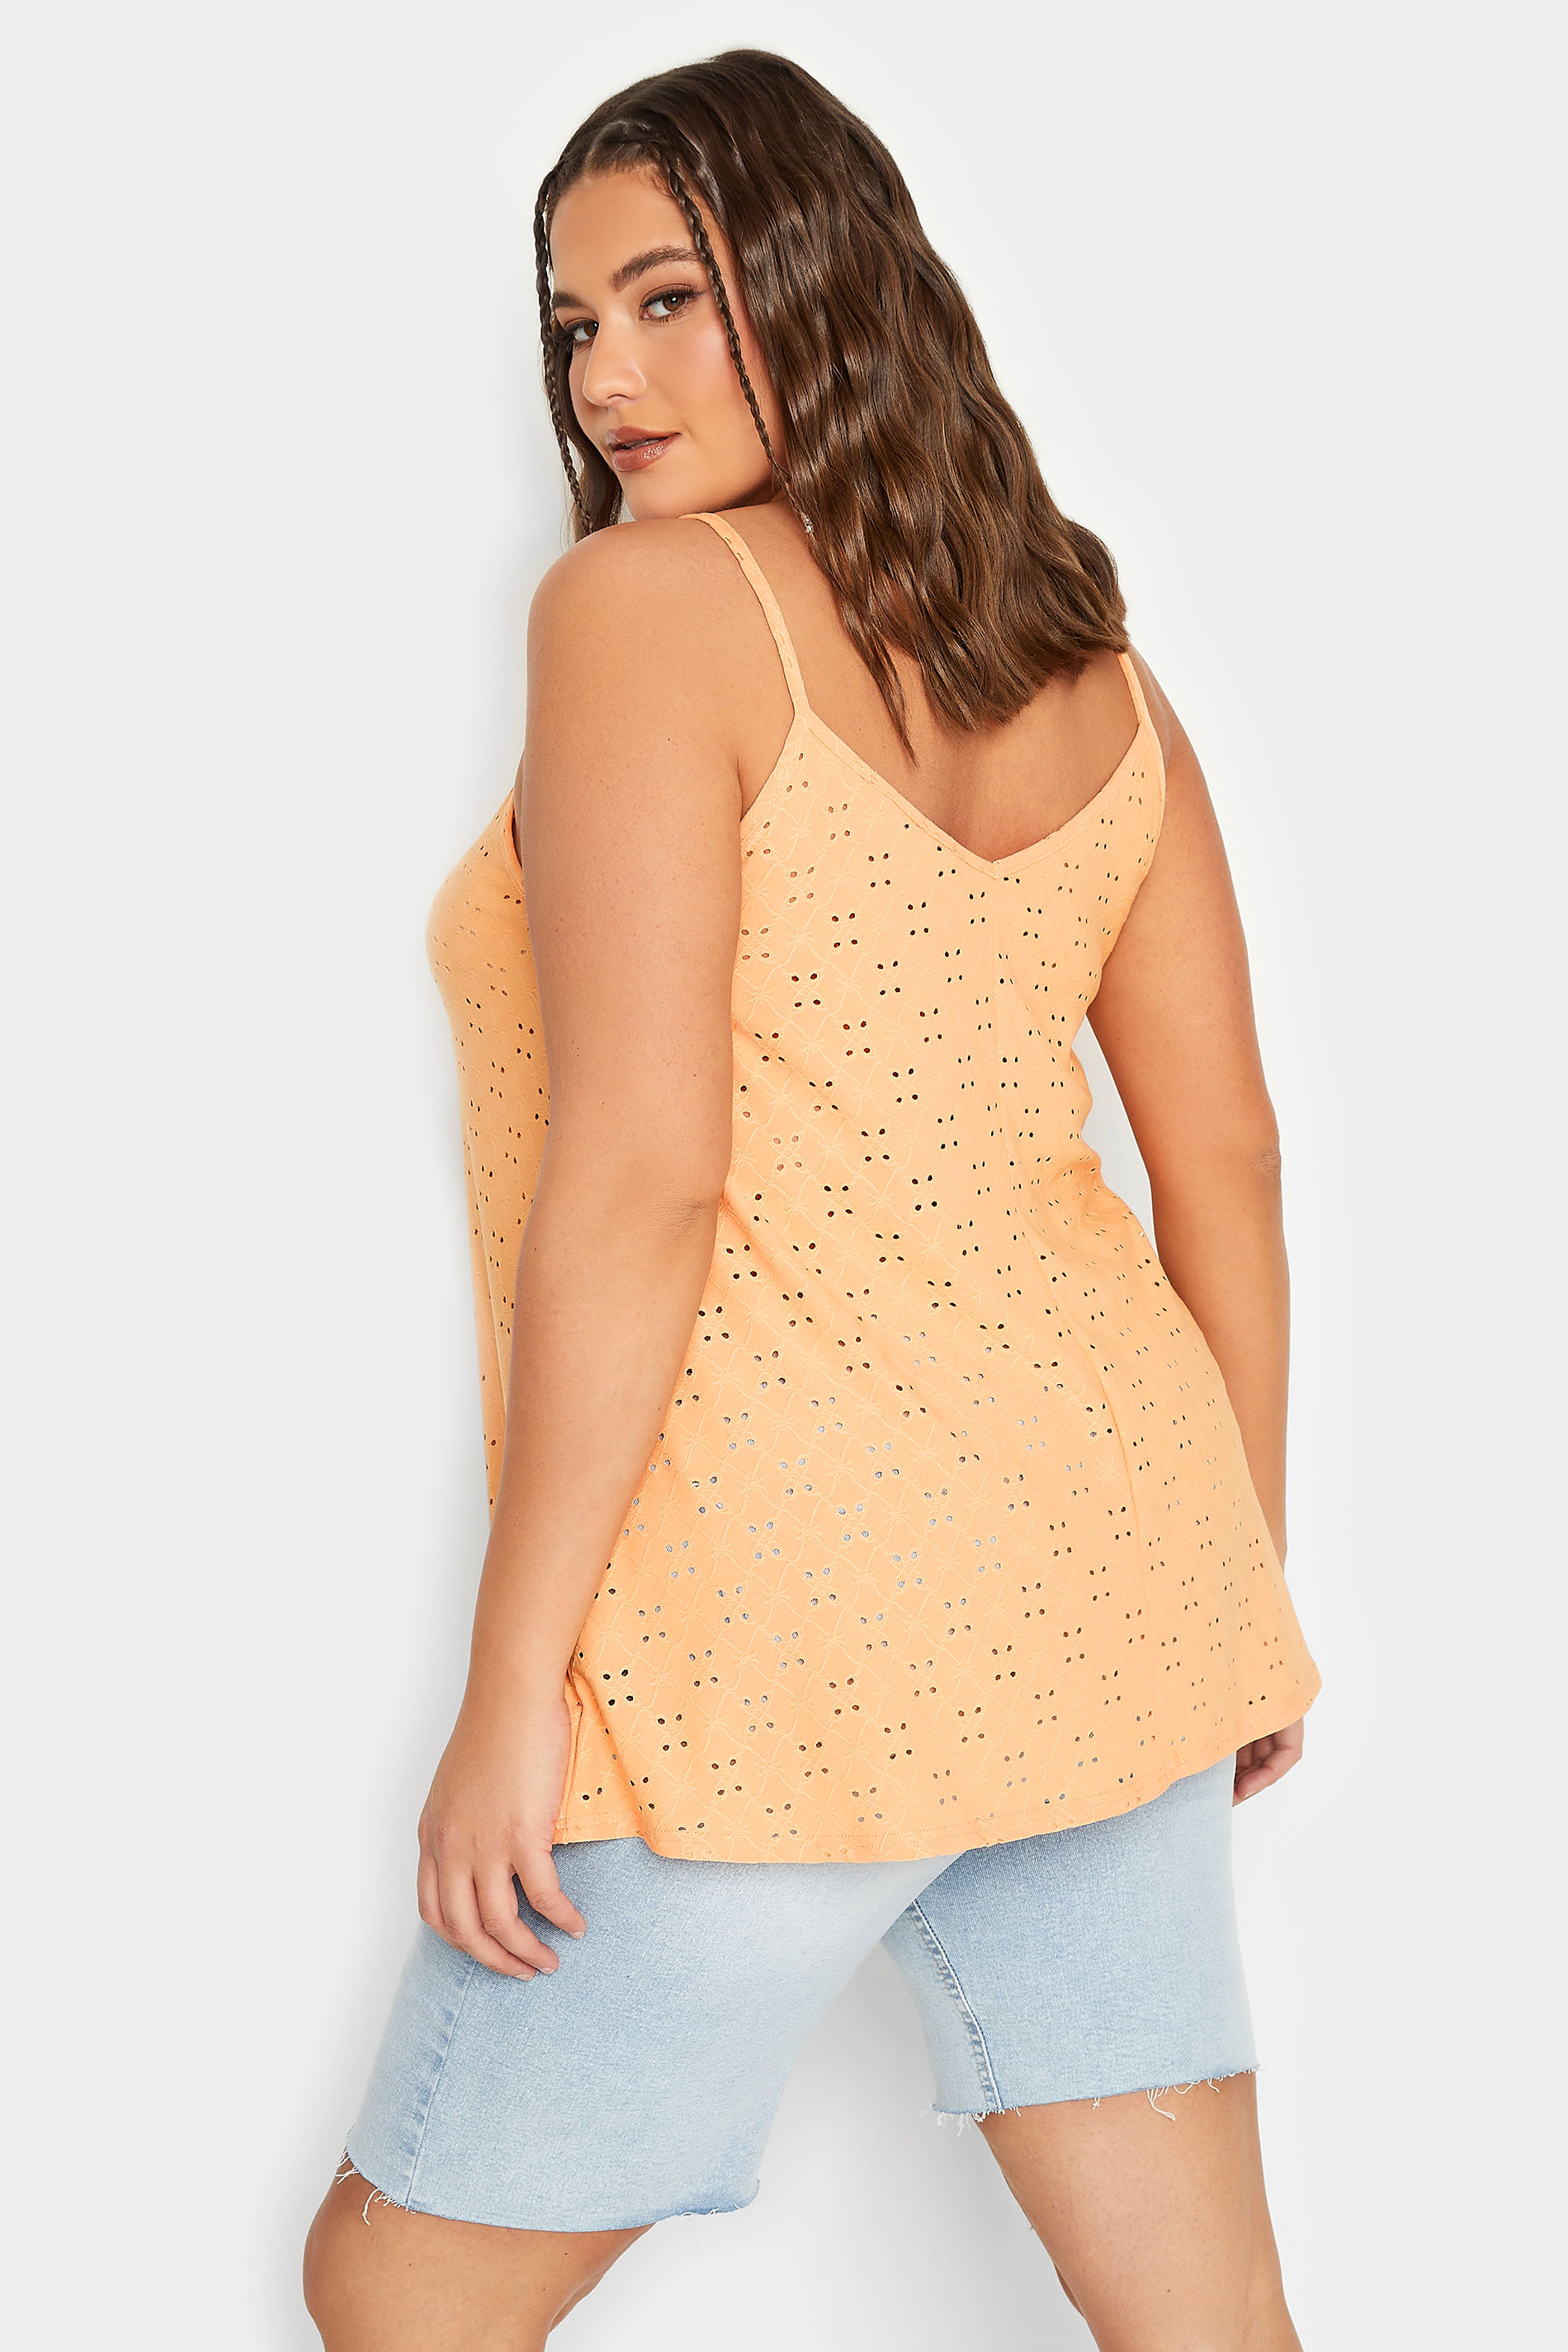 LIMITED COLLECTION Plus Size Orange Broderie Anglaise Cami Vest Top | Yours Clothing 3